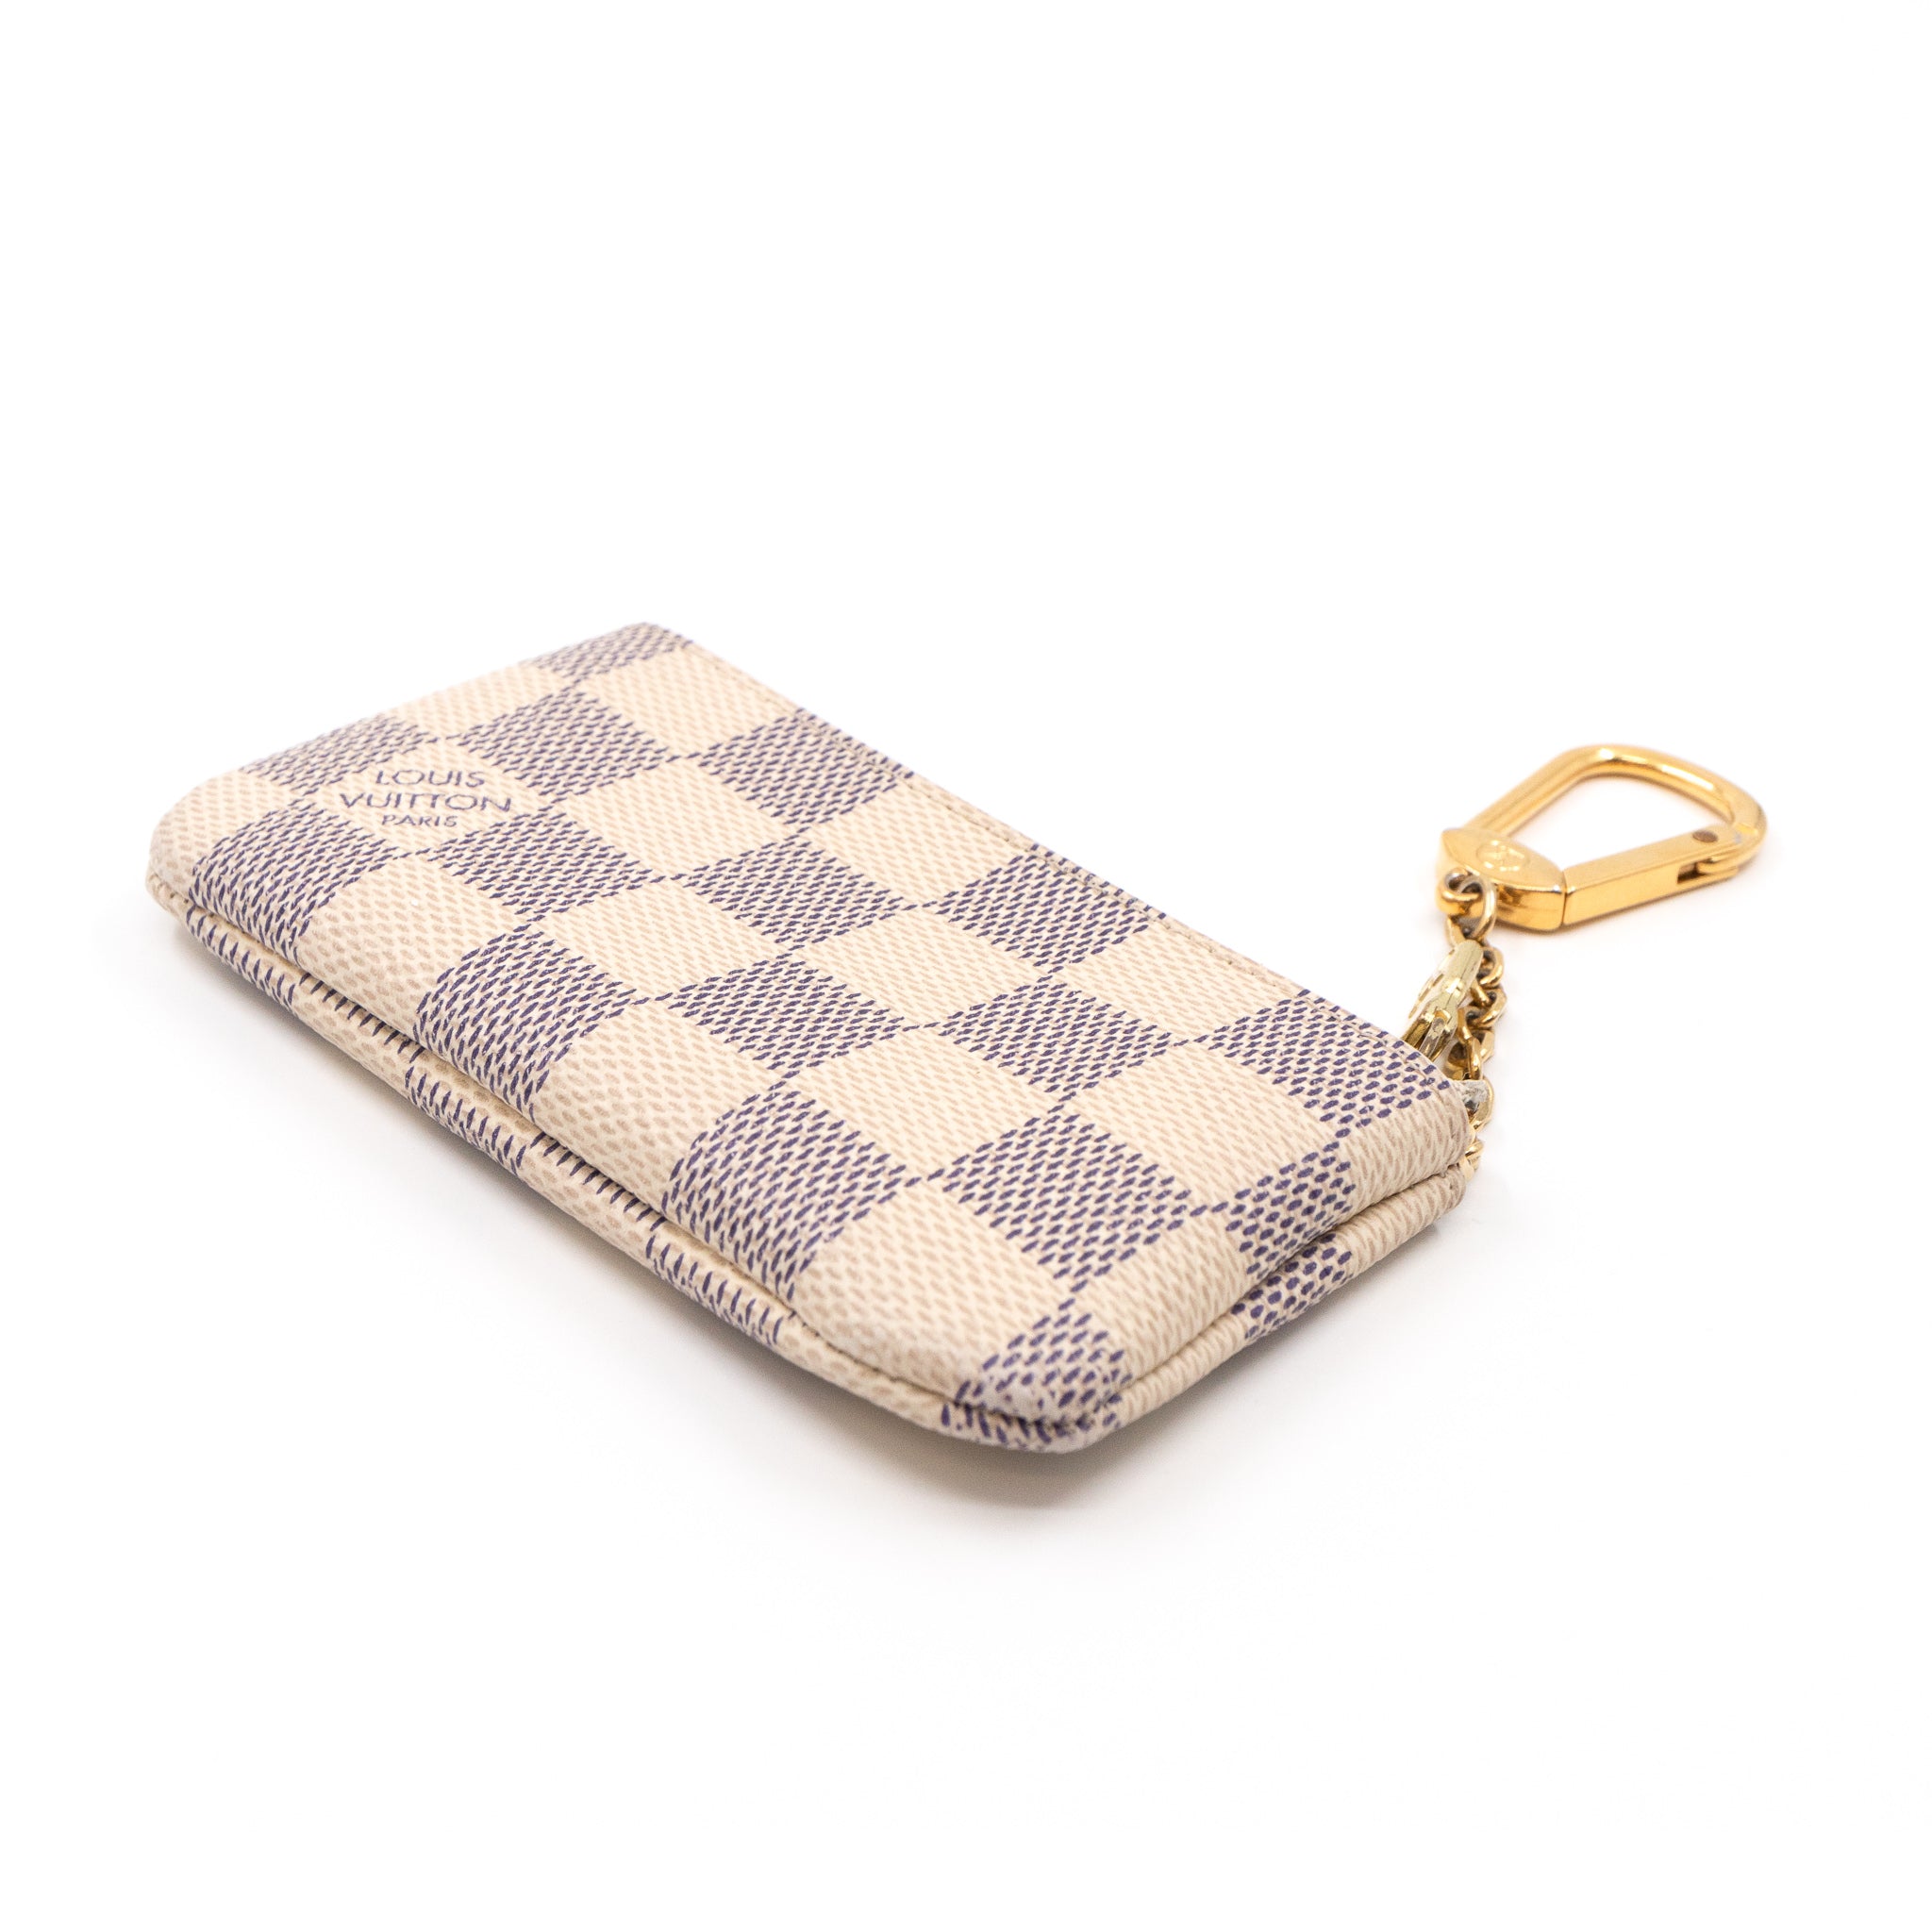 LOUIS VUITTON KEY POUCH IN DAMIER GRAPHITE  WHAT FITS INSIDE  YouTube